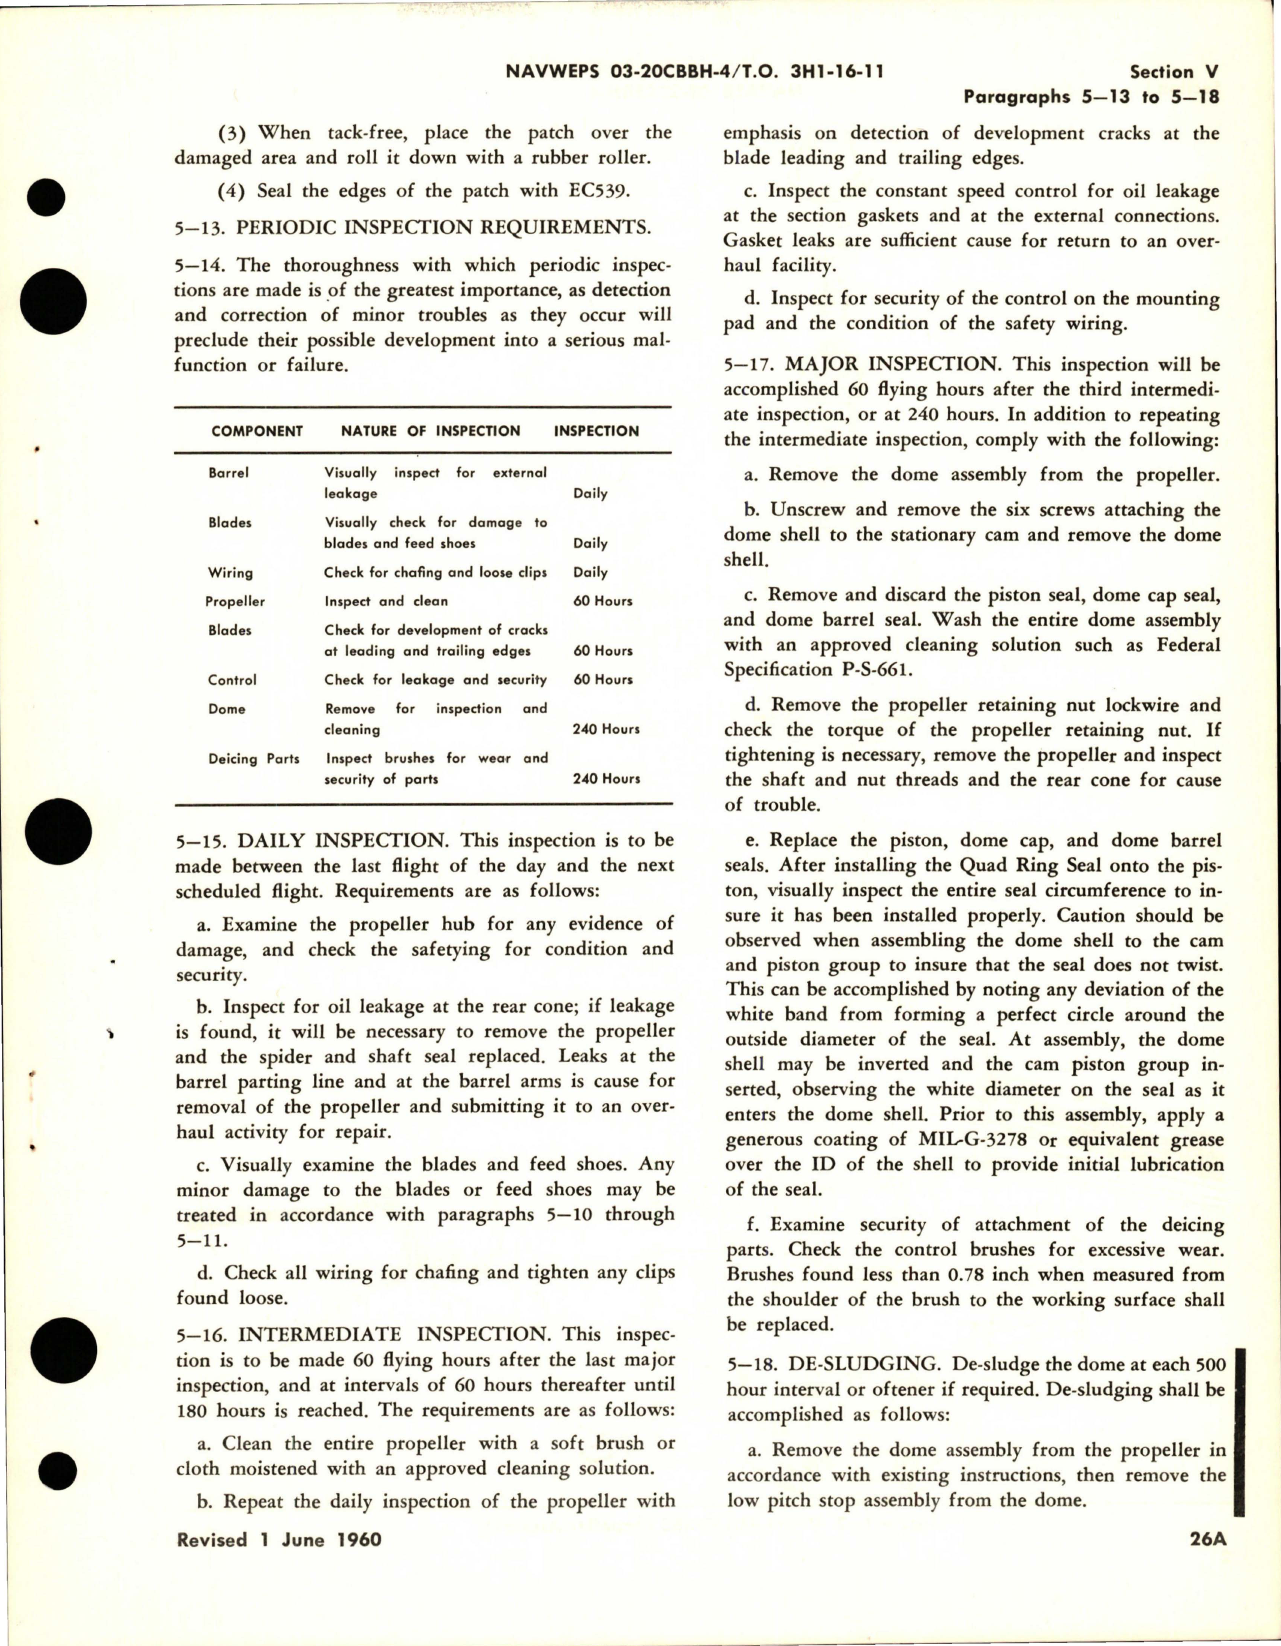 Sample page 5 from AirCorps Library document: Operation and Maintenance Instructions for Variable Pitch Propeller - Models 43H60-359, 43H60-383, and 43H60-395 